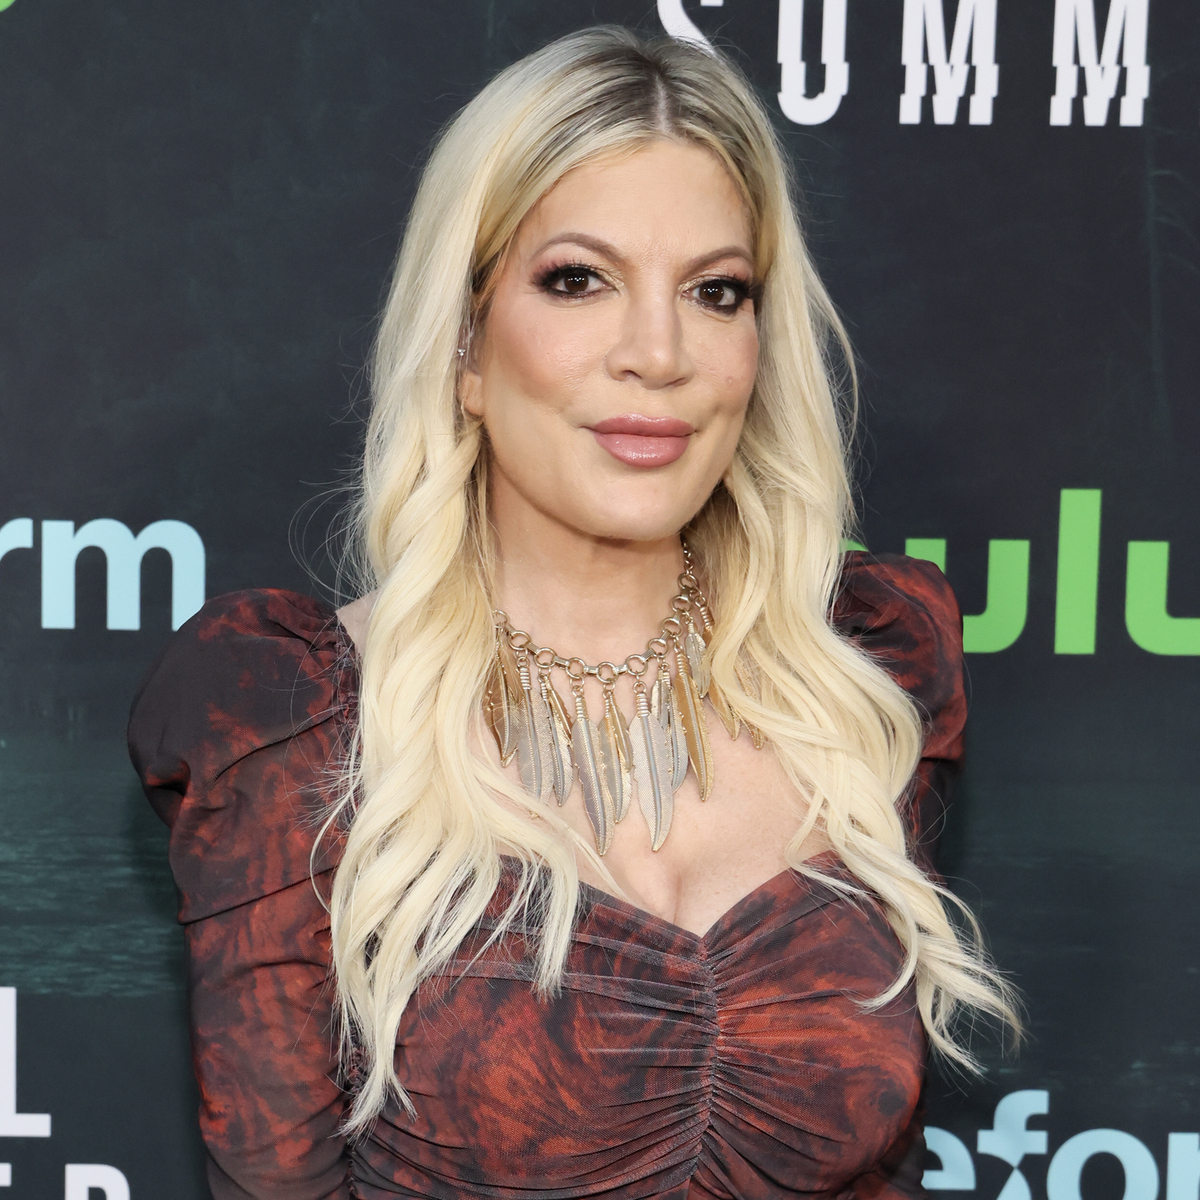 Tori Spelling Spotted Packing on the PDA With New Man Amid Dean Split